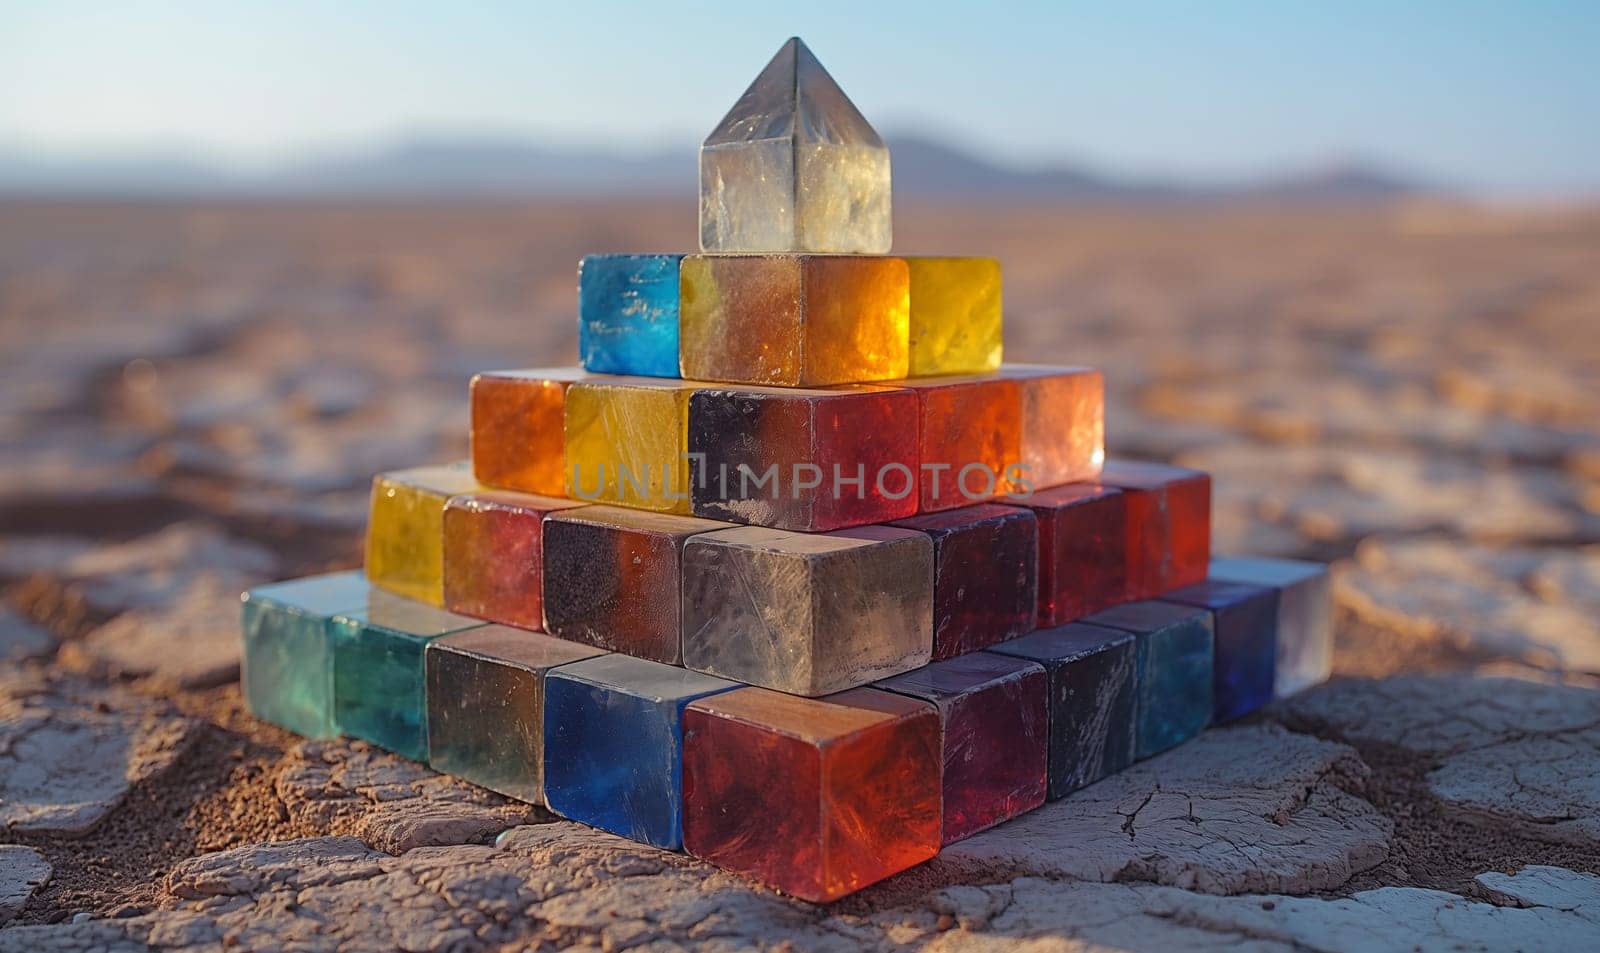 Colorful Cube Pyramid in Desert. by Fischeron